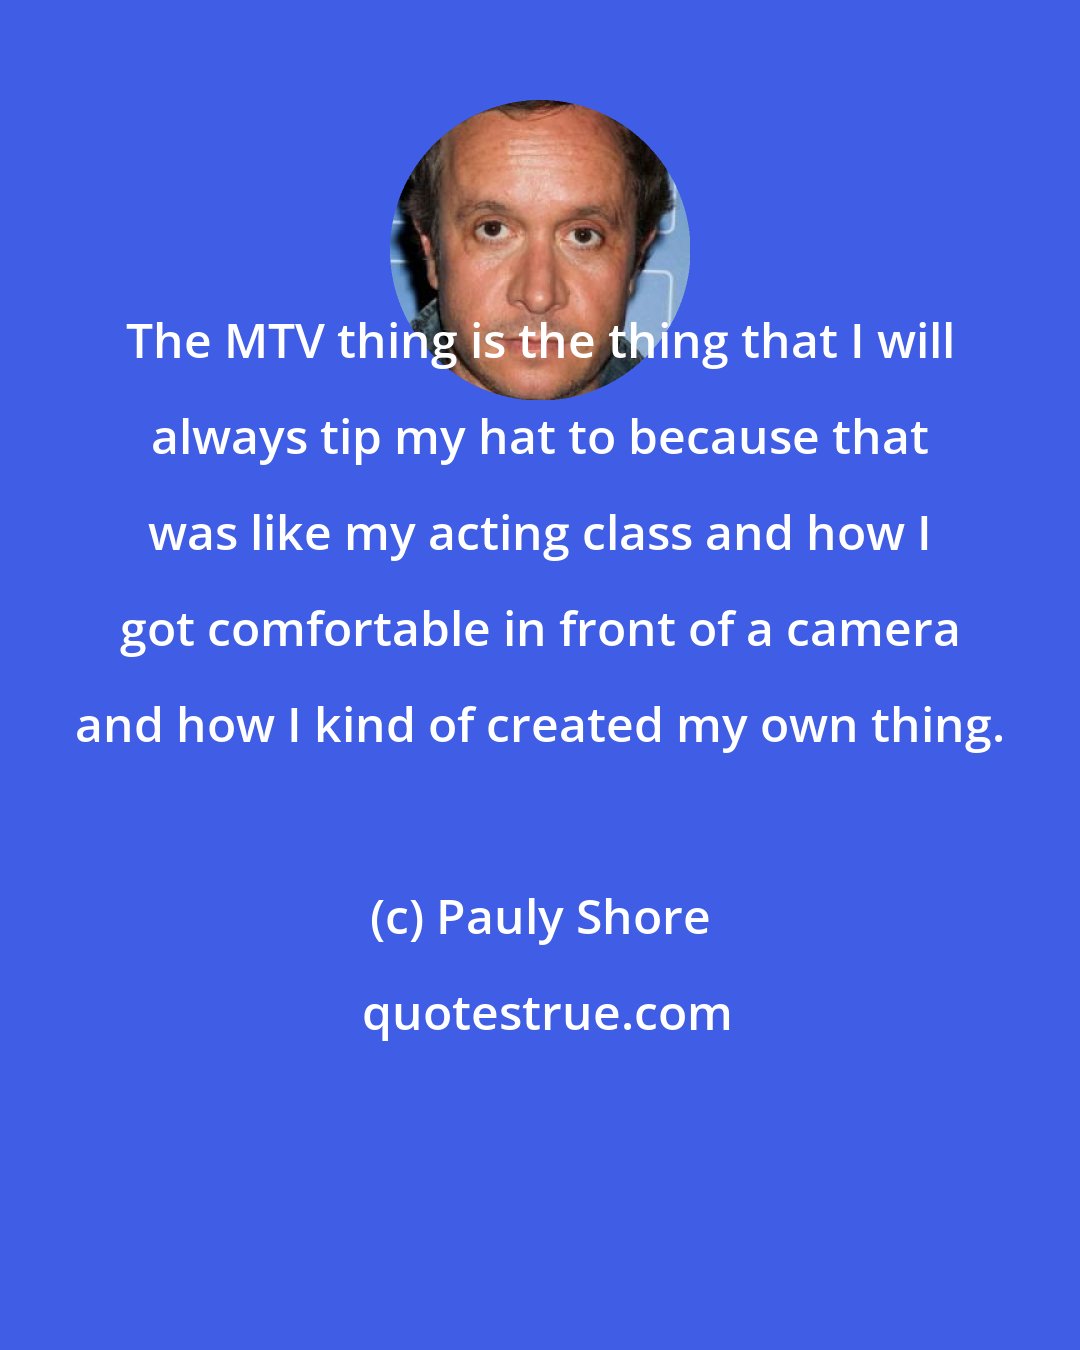 Pauly Shore: The MTV thing is the thing that I will always tip my hat to because that was like my acting class and how I got comfortable in front of a camera and how I kind of created my own thing.